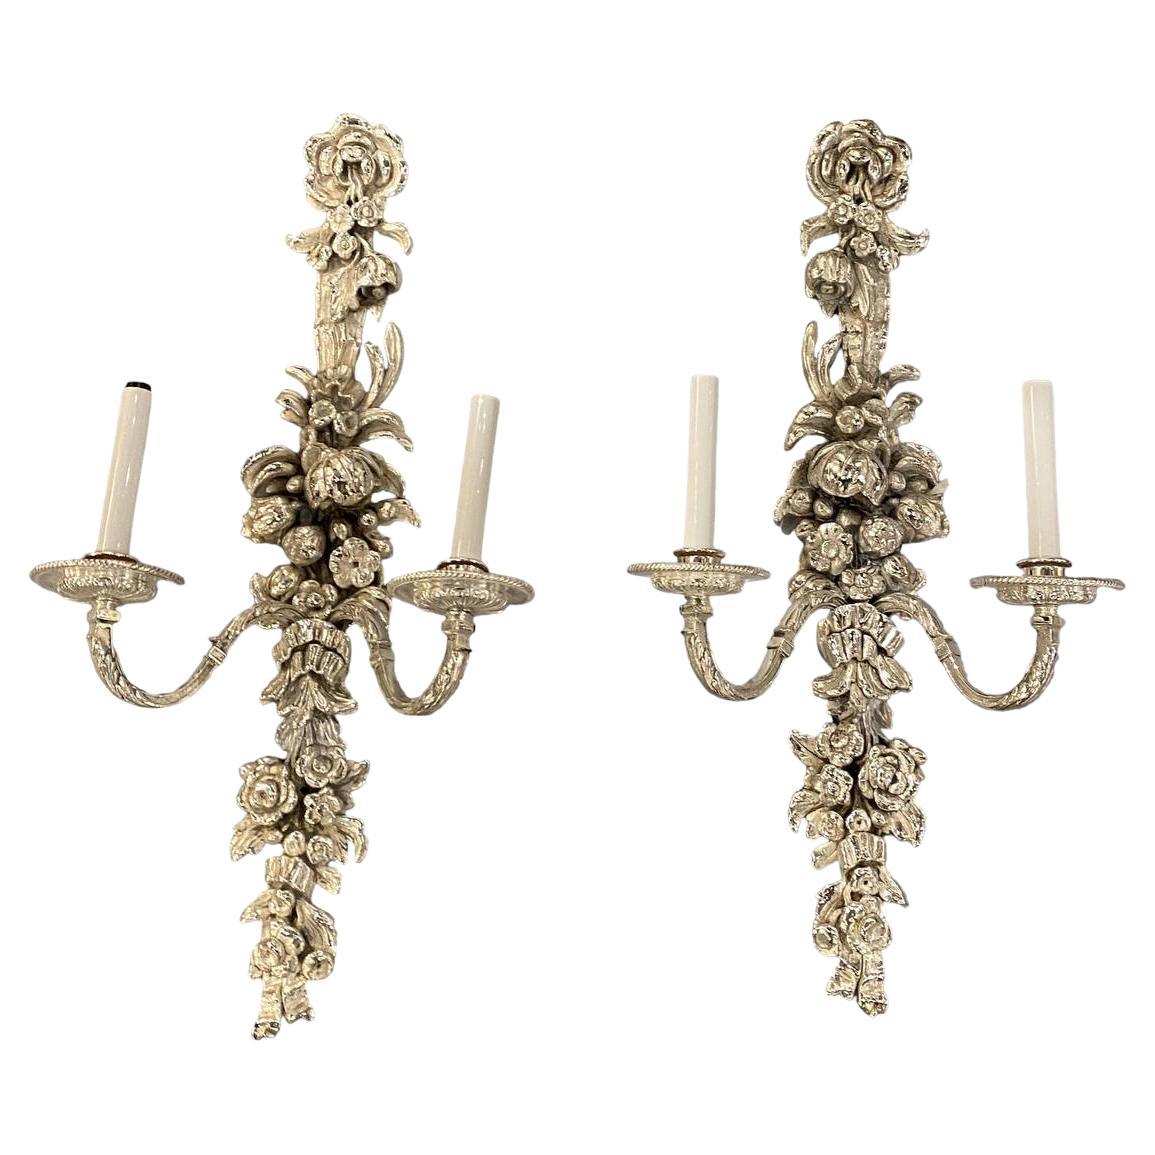 1900s Large Caldwell Silver Plated Sconces with flower design  For Sale